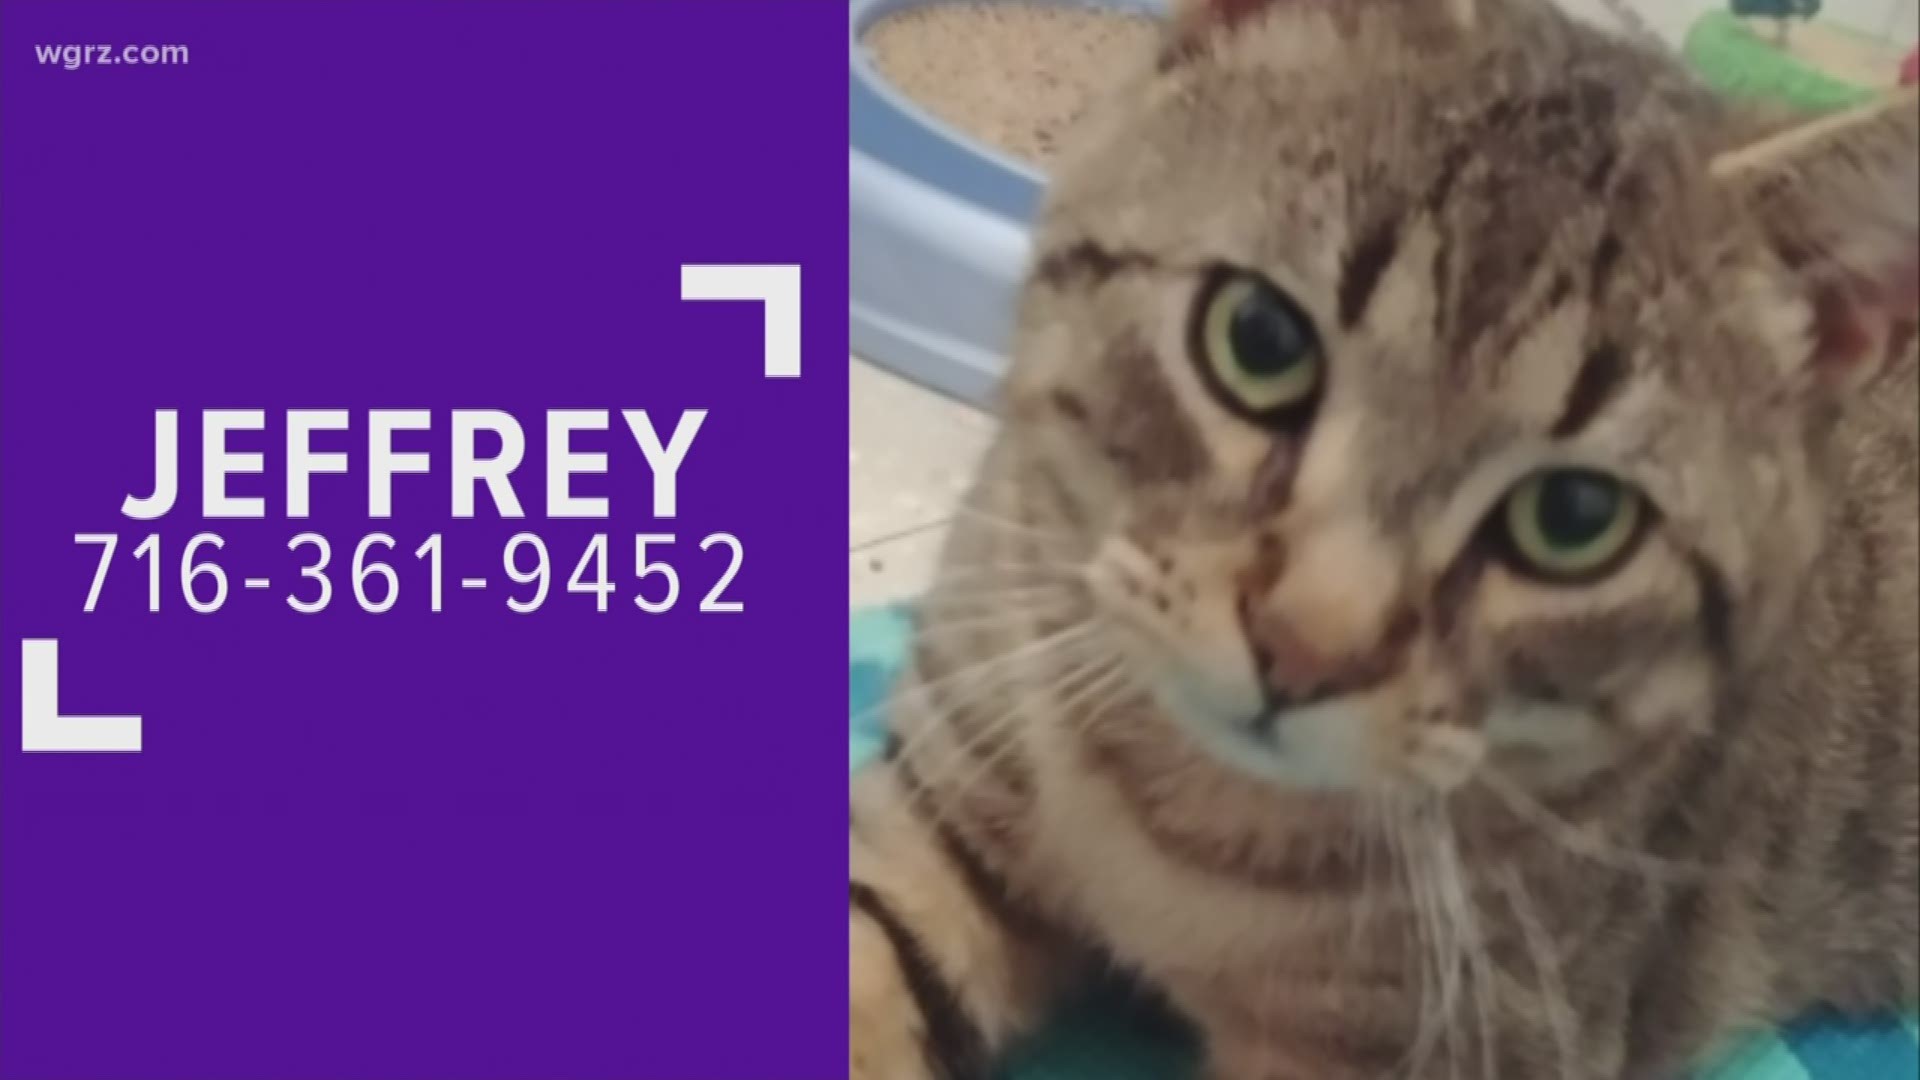 Jeffrey is a gentle, lovable cat at the Buffalo Animal Shelter. He is a little over 1 year old, and is looking for a good home for Christmas.